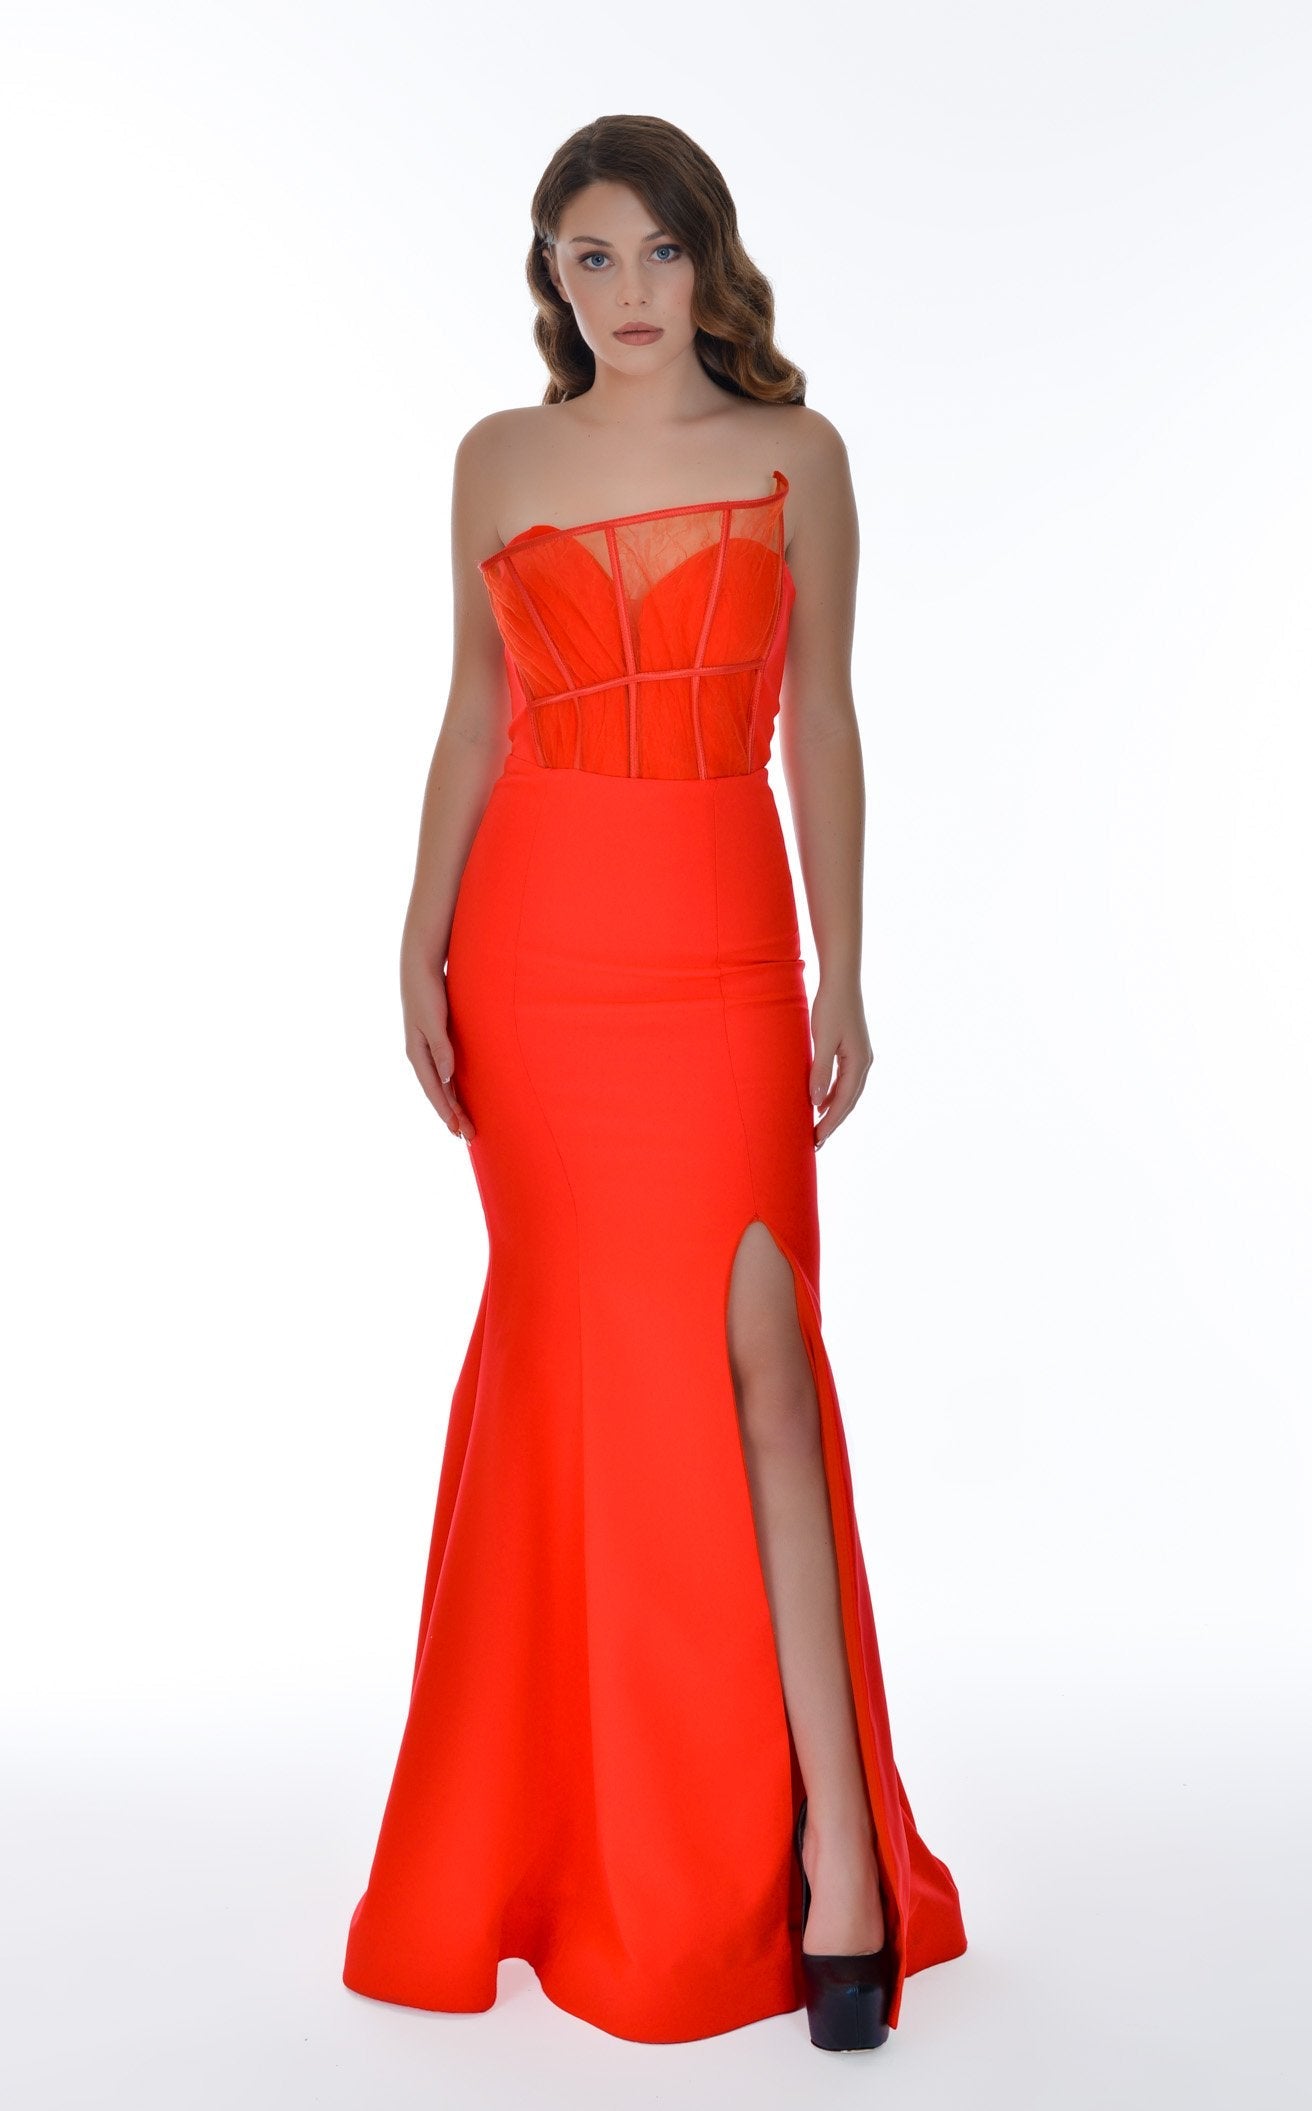 Red Carpet Dresses Online  Shop Hollywood Gowns Today – NewYorkDress